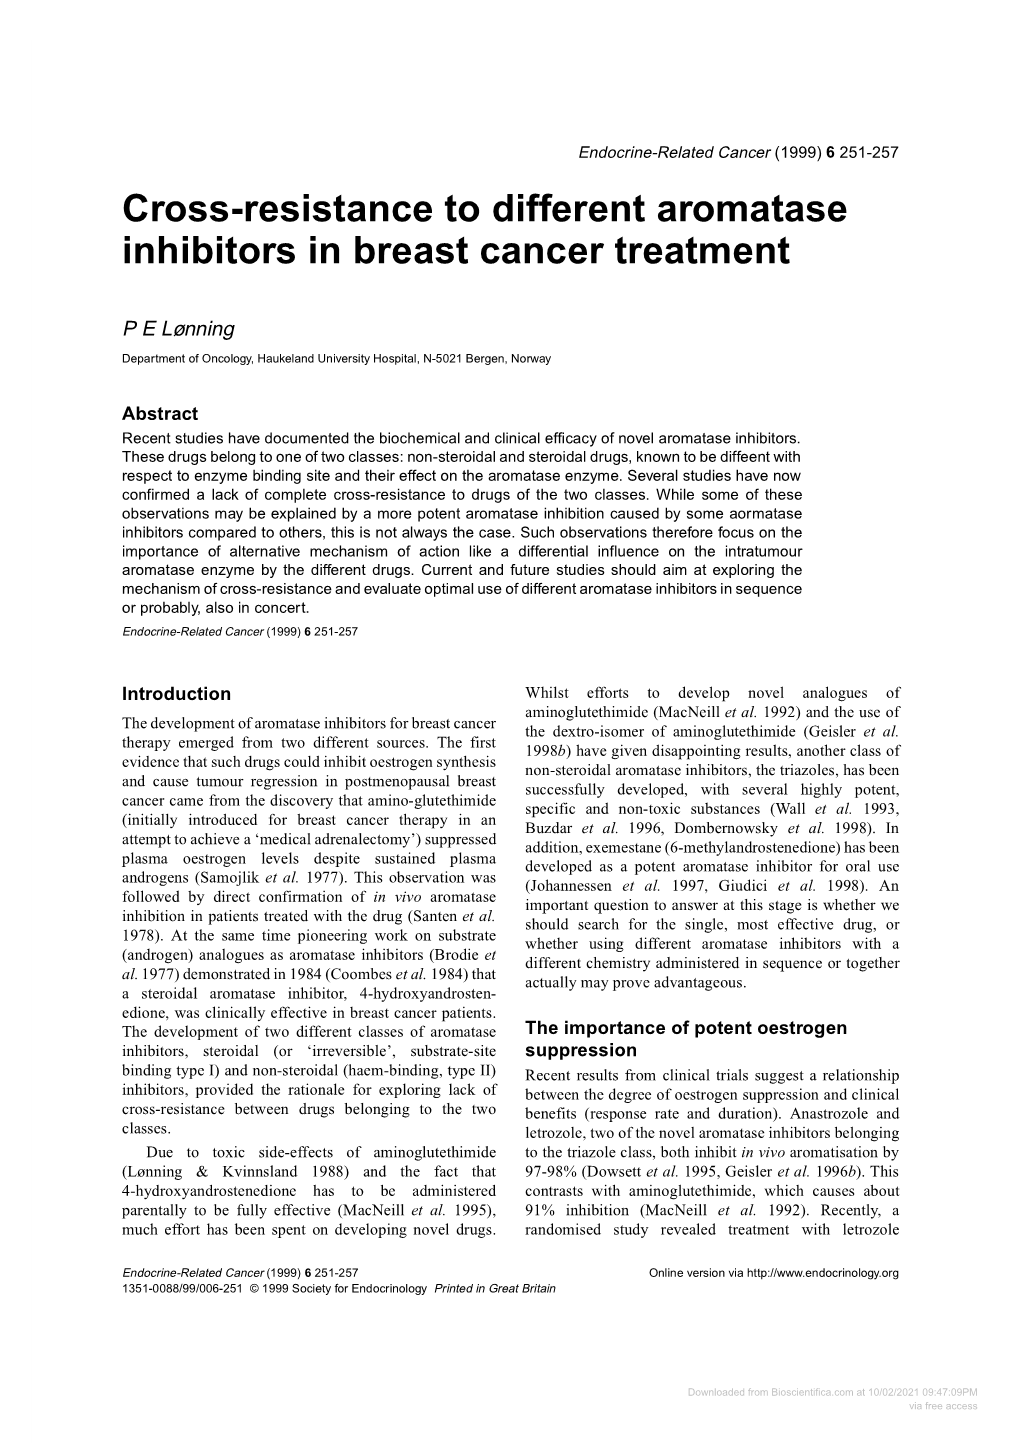 Cross-Resistance to Different Aromatase Inhibitors in Breast Cancer Treatment